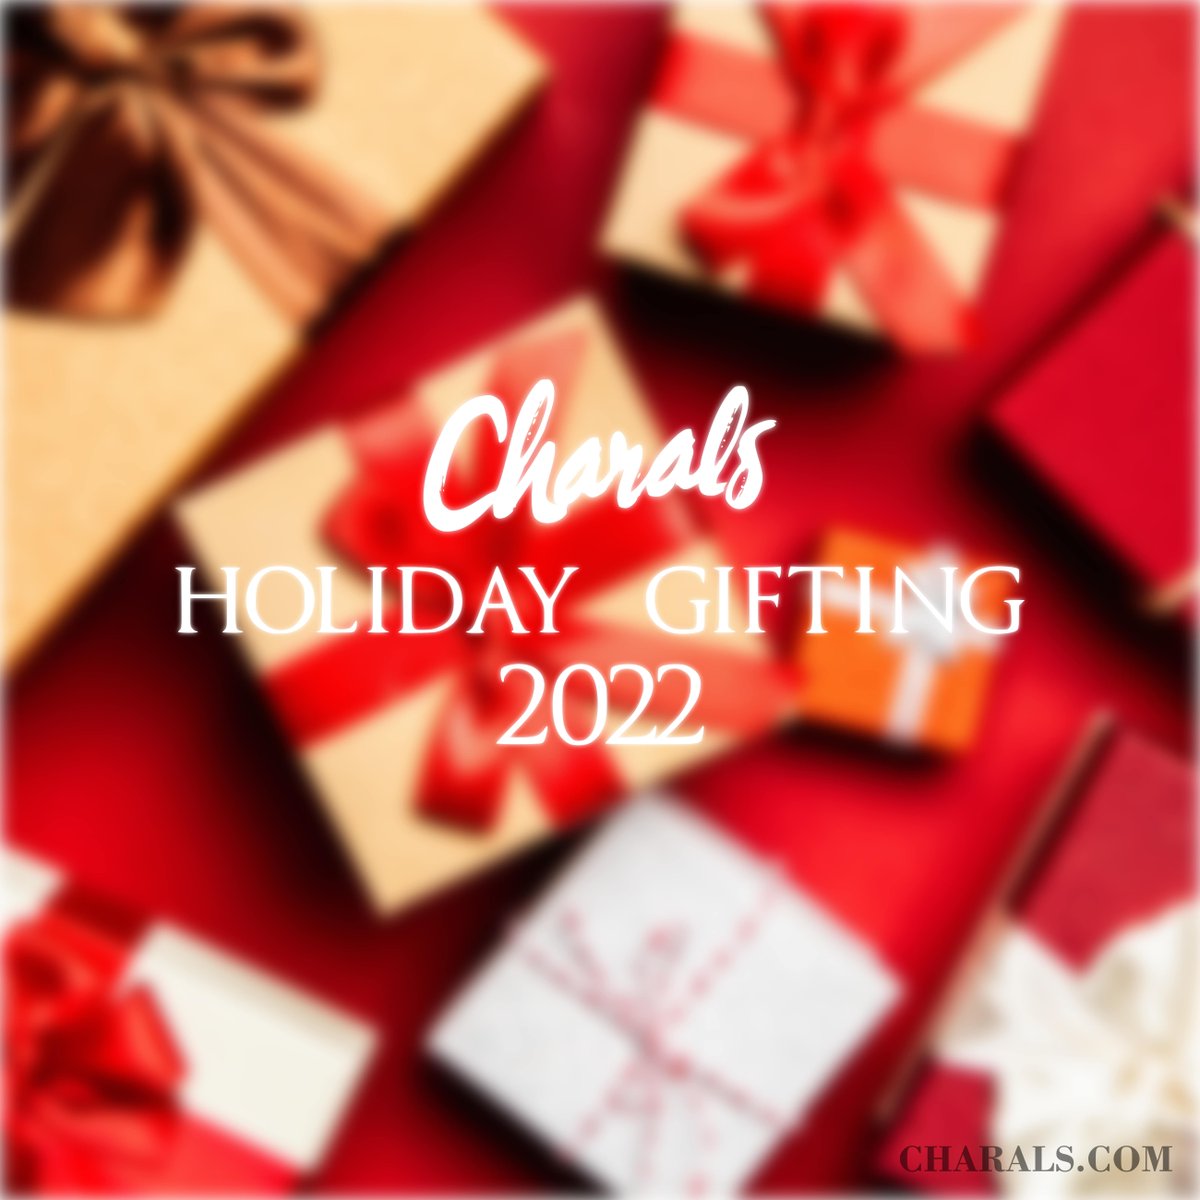 Our annual Holiday Gift Guide is up now! Go over to our Instagram page to see the amazing gift ideas! instagram.com/charalsvancouv… #holidaygiftguide #xmasgifts #christmaspresents #localshopvancouver #supportlocalvancouver #seasonofgiving #vancouverpenstore #vancouverpenshop